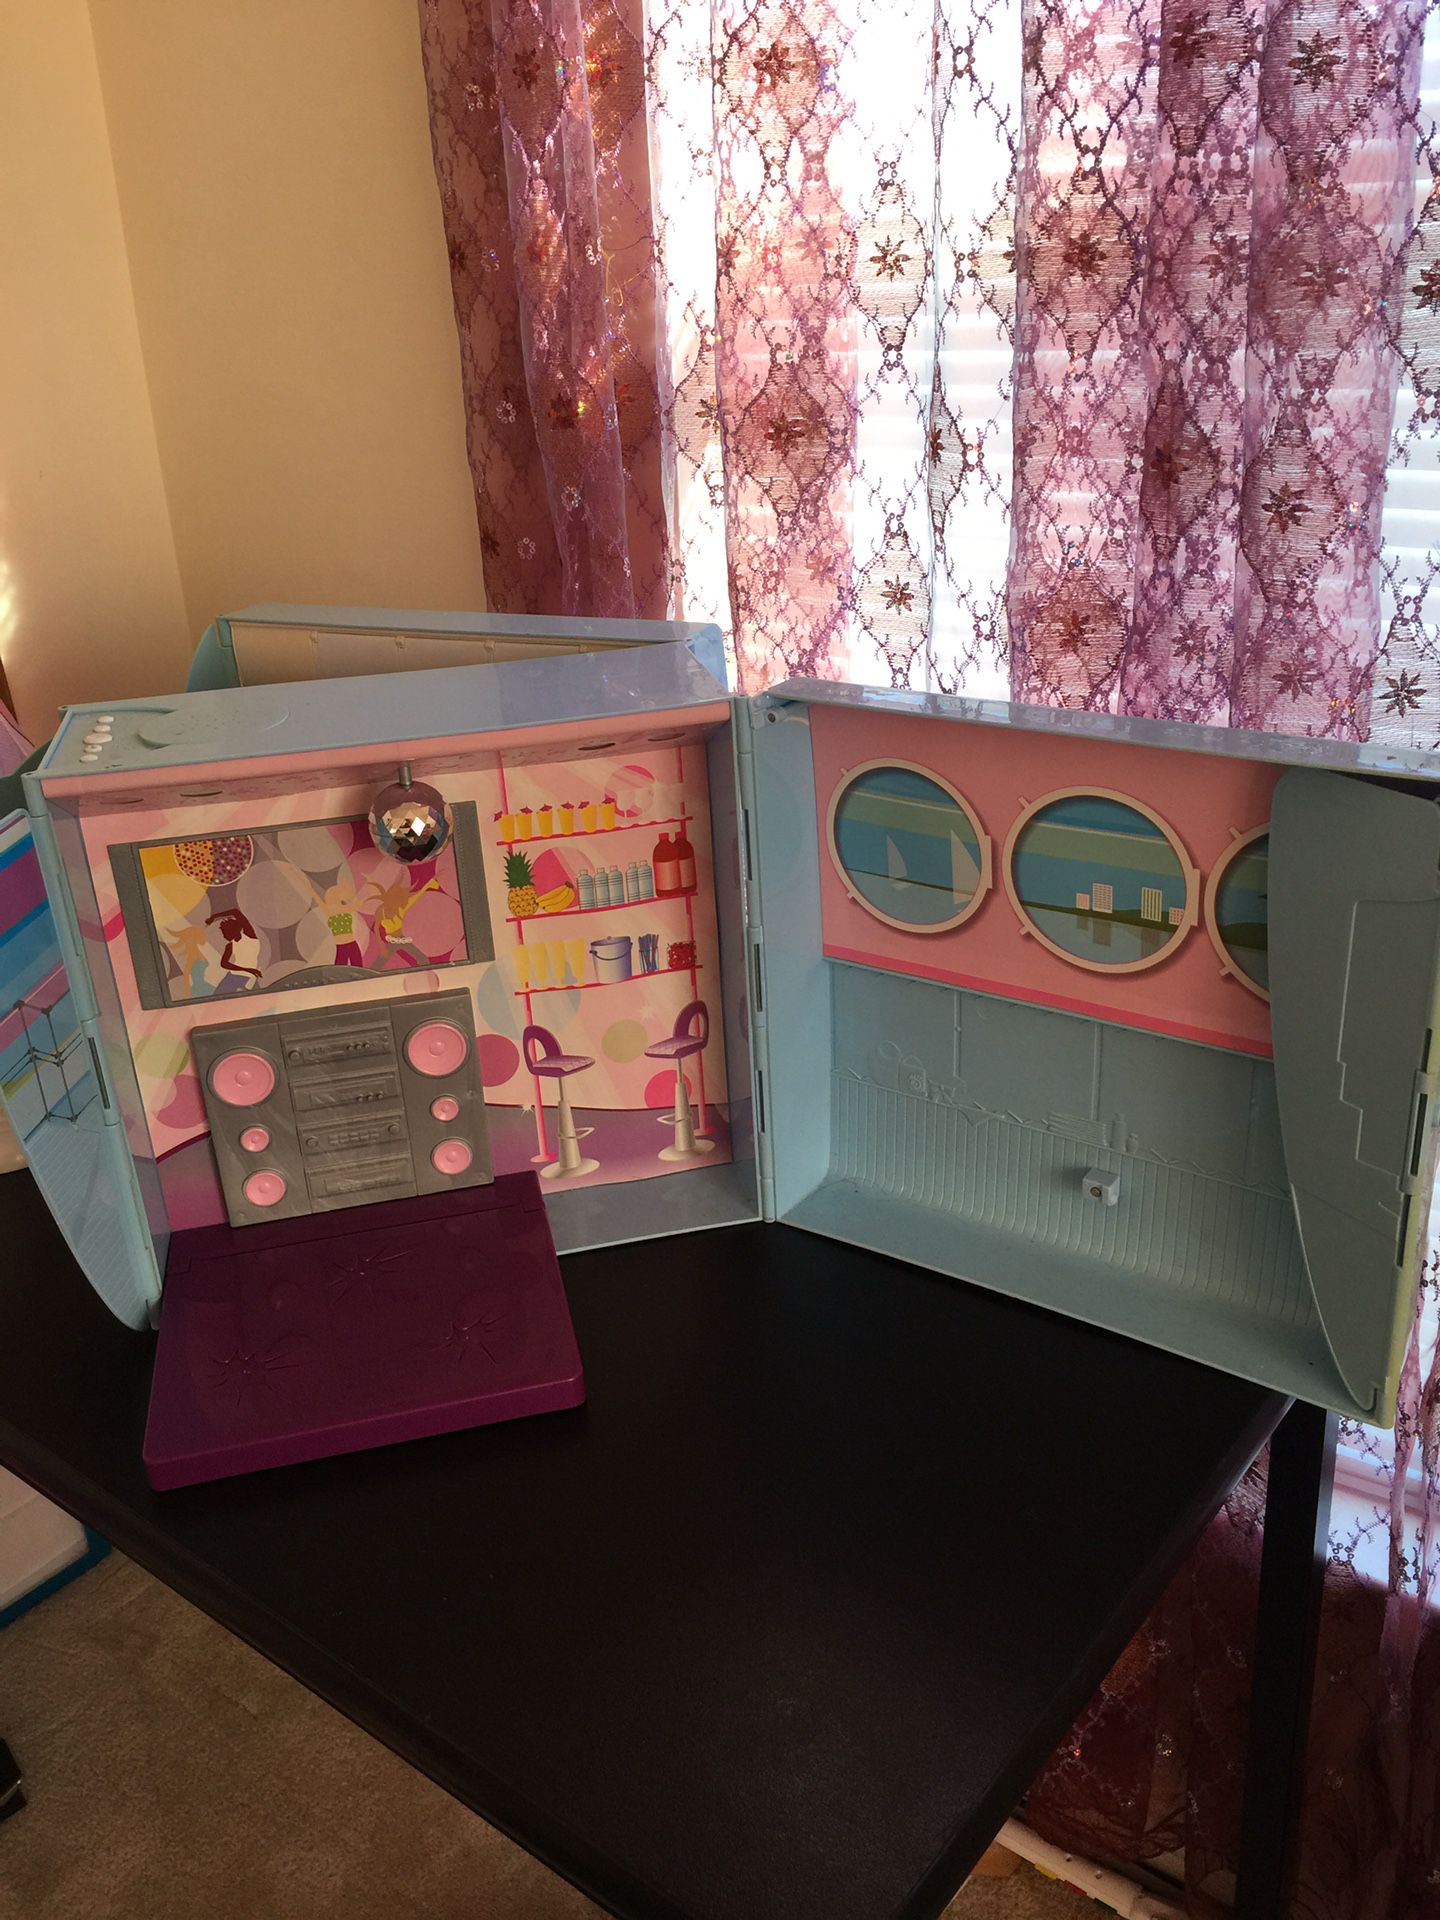 Barbie Jet opens up toy and a princess light